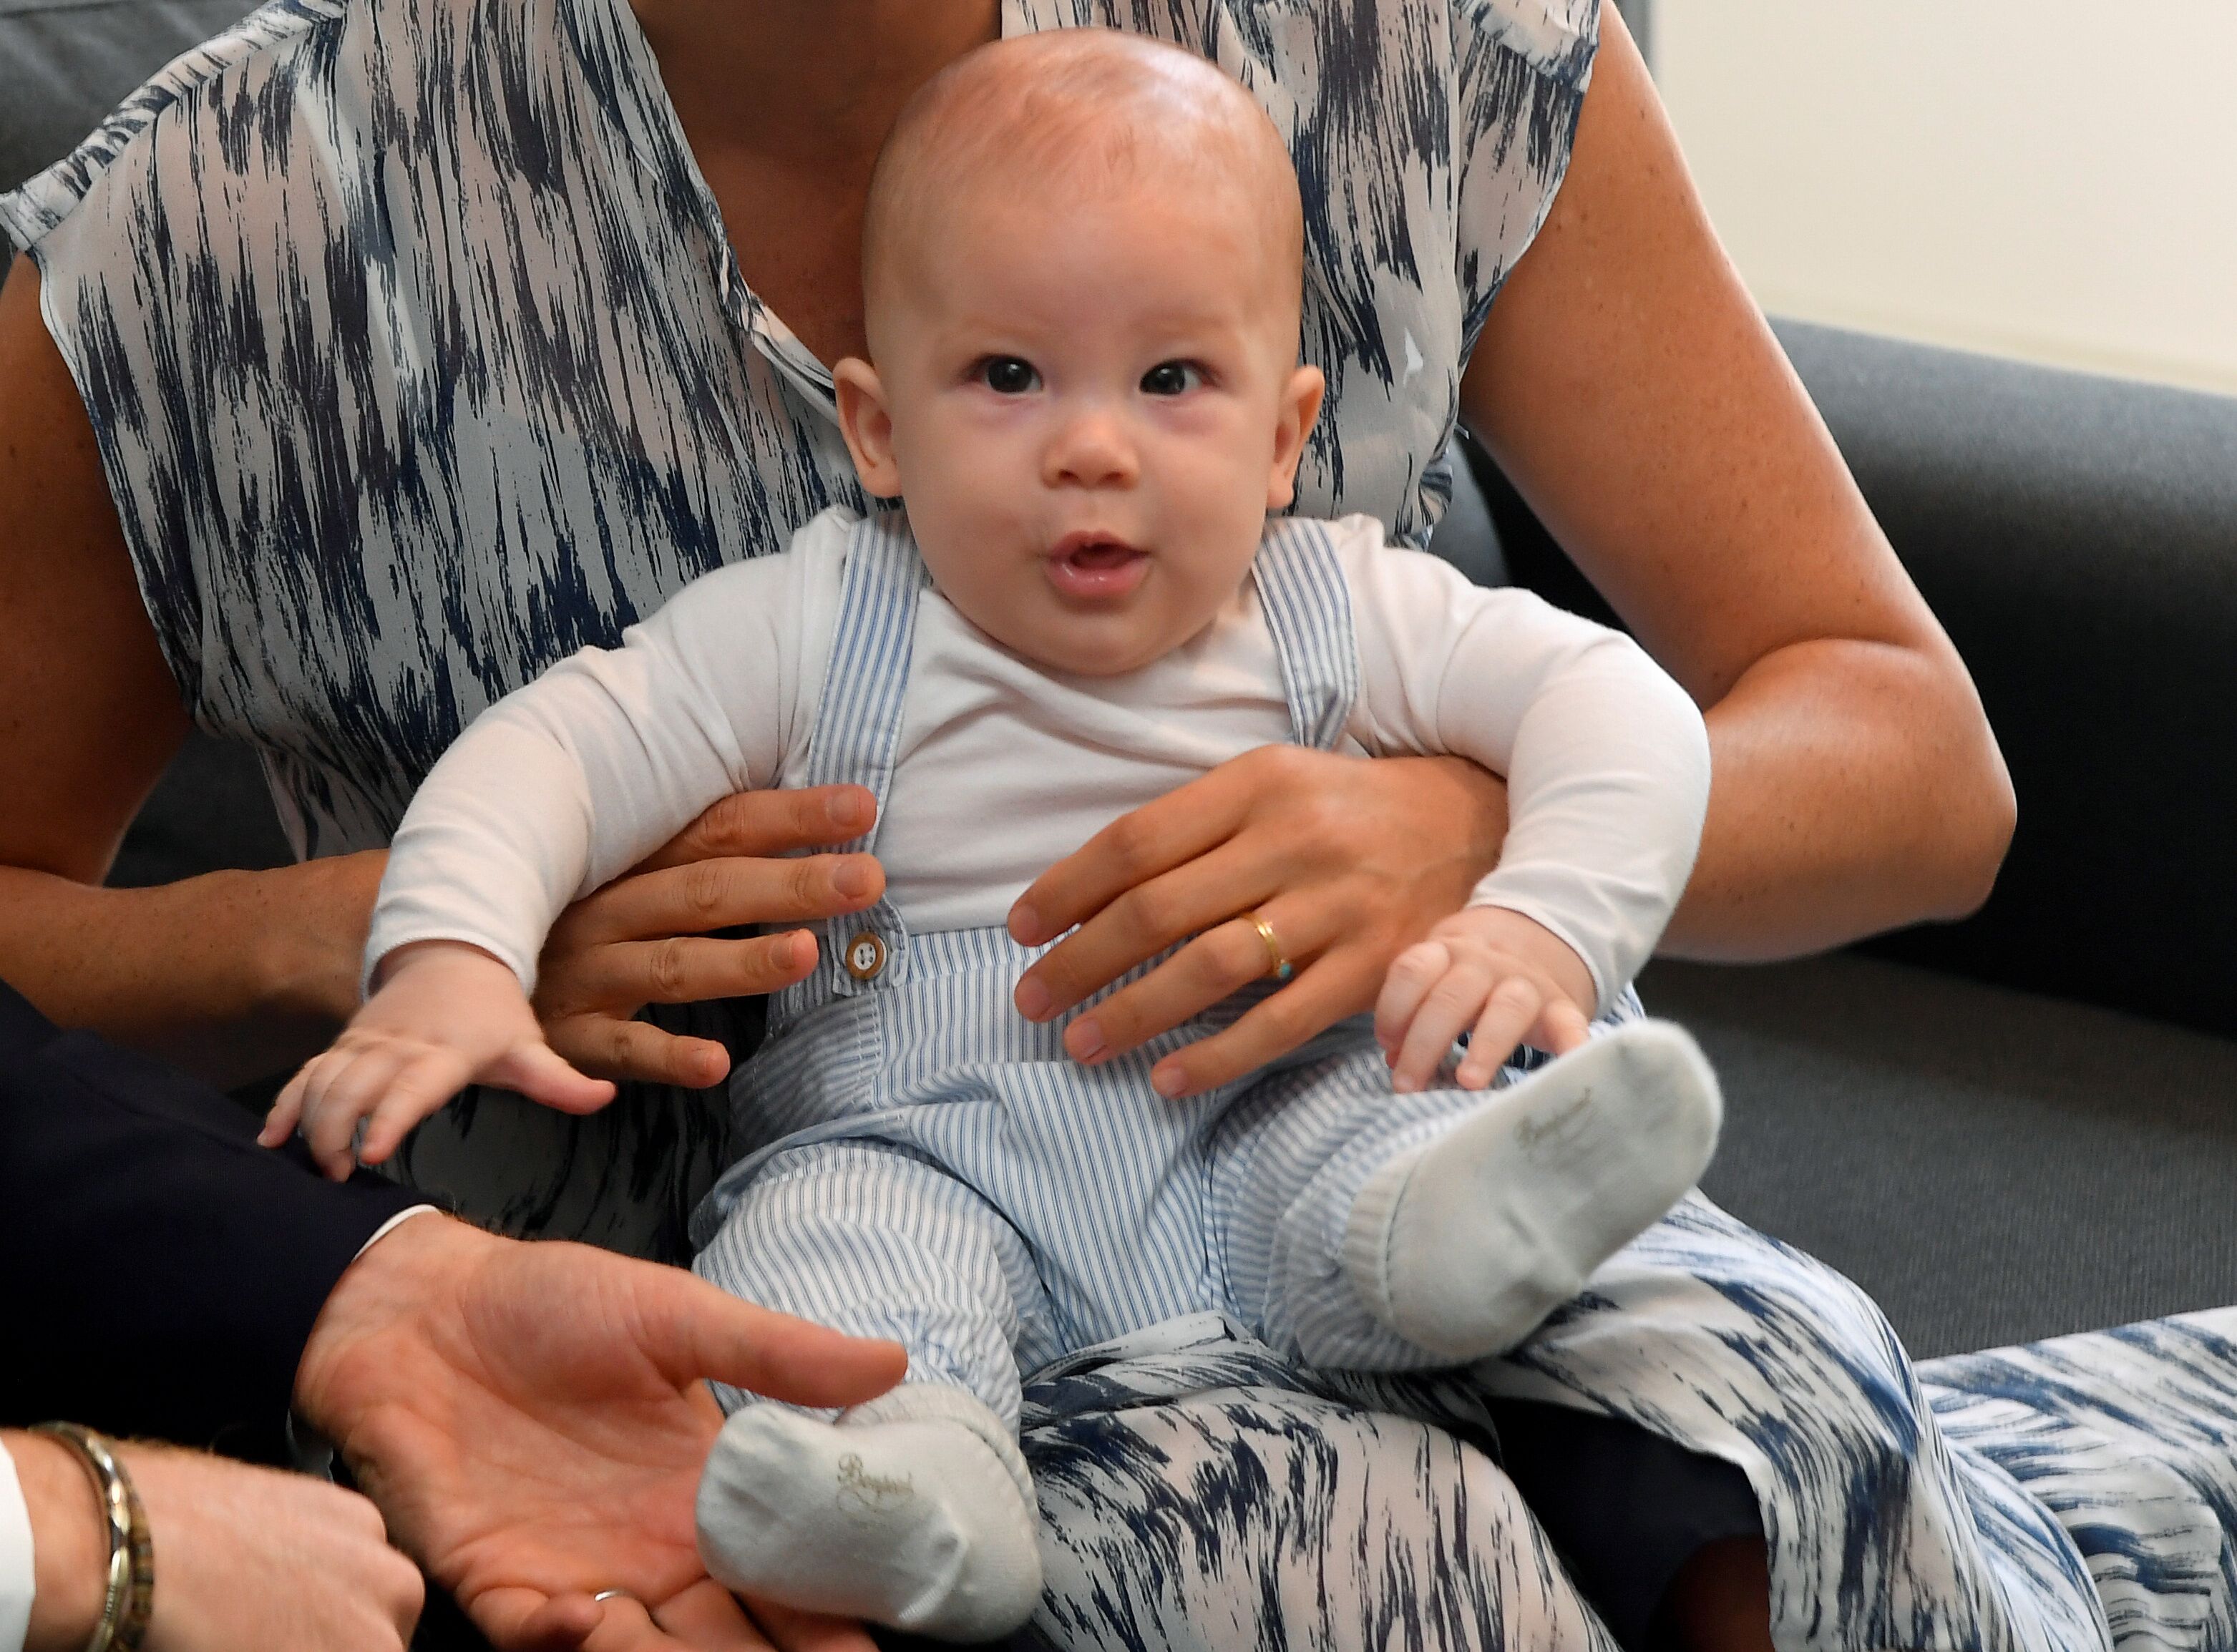 Meghan Markle and Prince Harry and their baby son Archie Mountbatten-Windsor at a meeting with Archbishop Desmond Tutu at the Desmond & Leah Tutu Legacy Foundation during their royal tour of South Africa on September 25, 2019 in Cape Town, South Africa. | Source: Getty Images